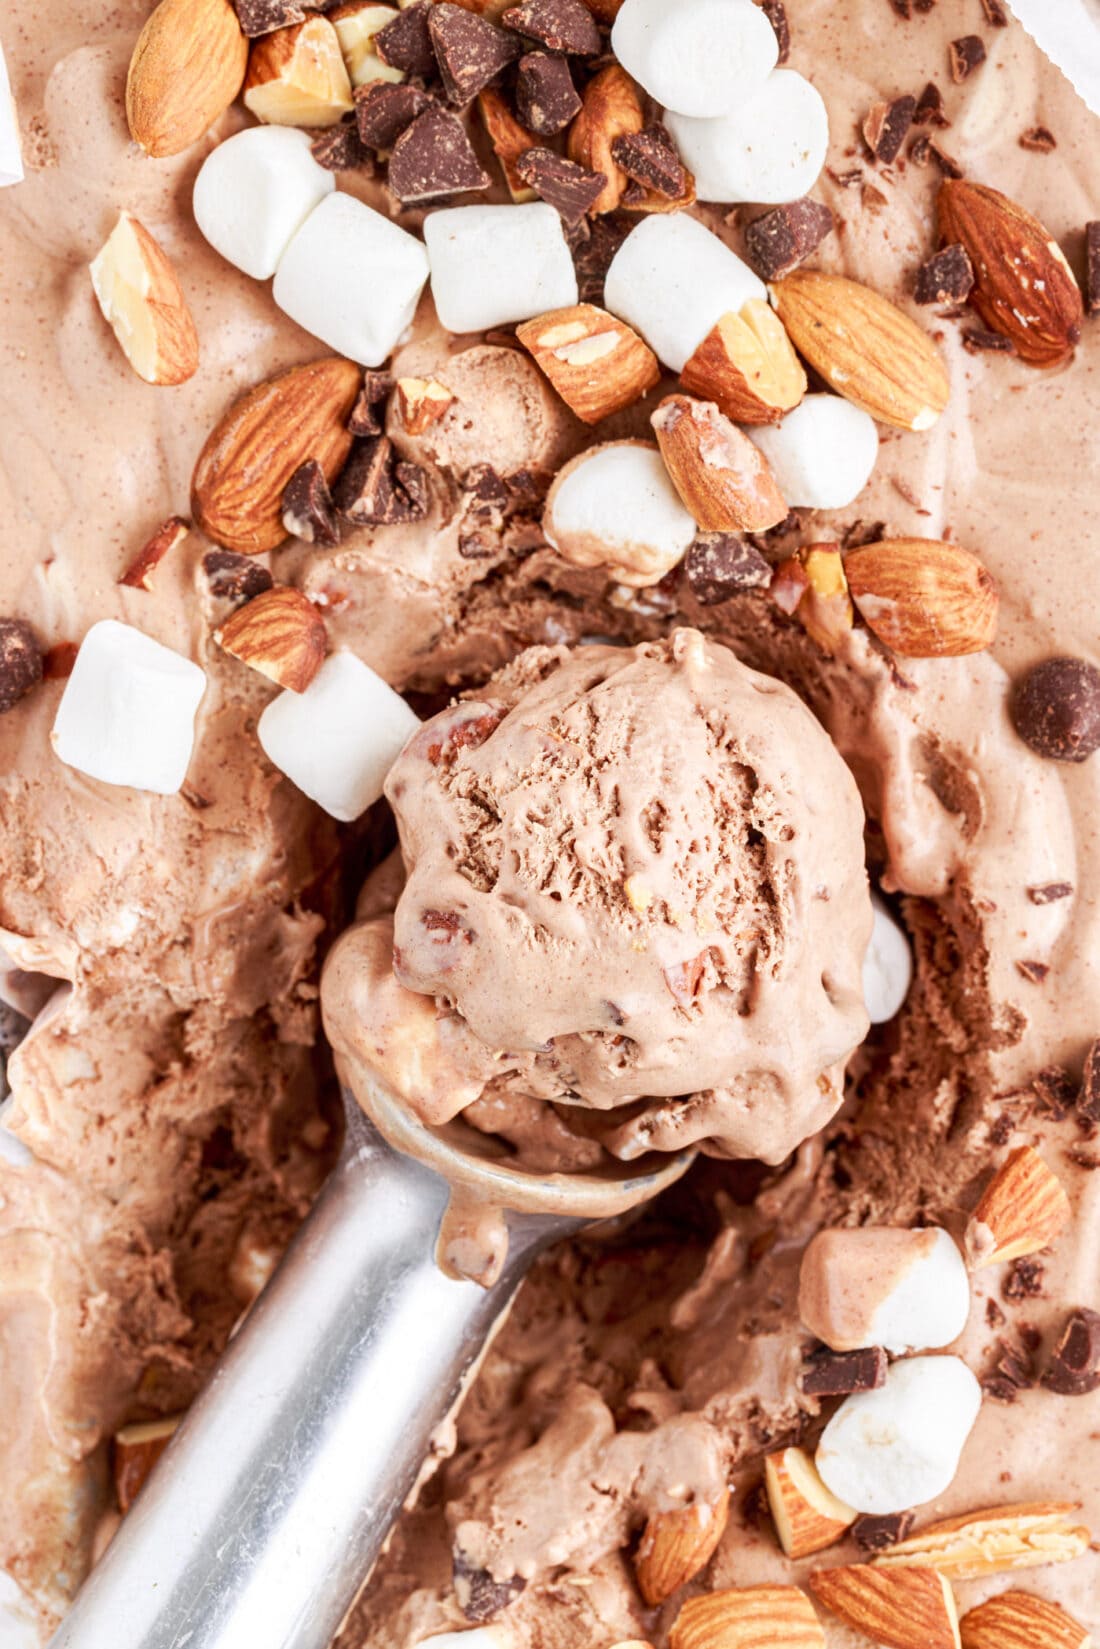 scooping out some Rocky Road Ice Cream